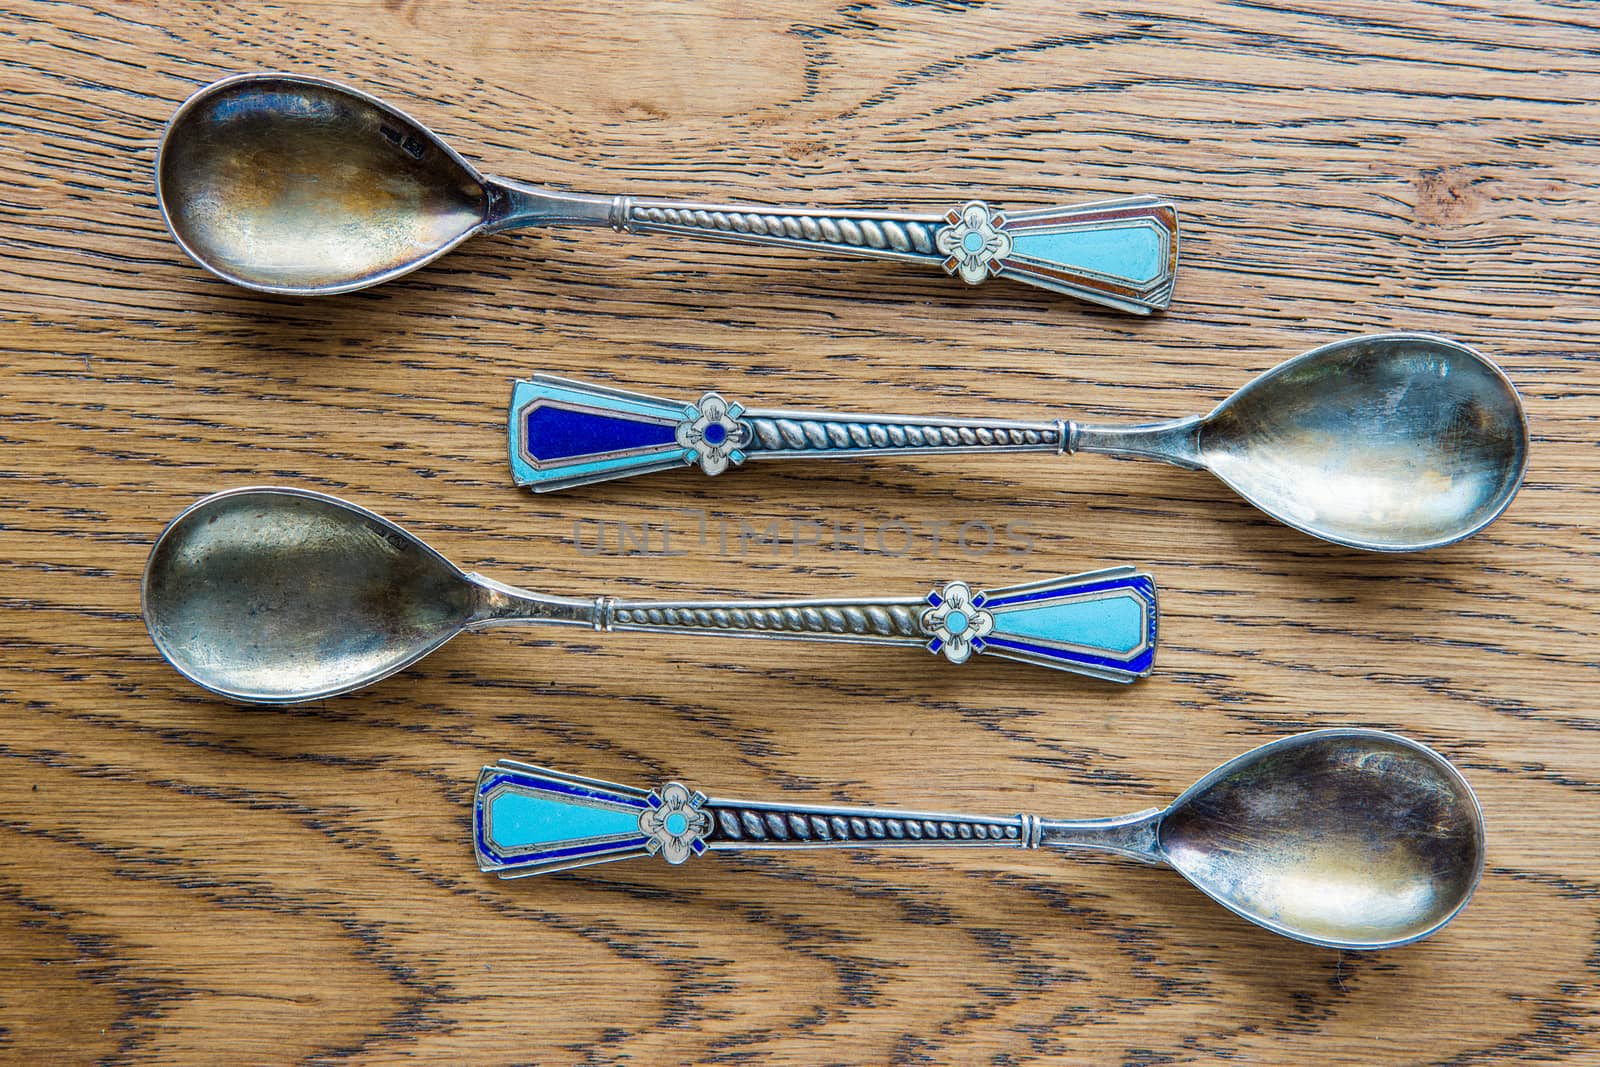 Small, antique spoons of the same size and shape lie on an oak table